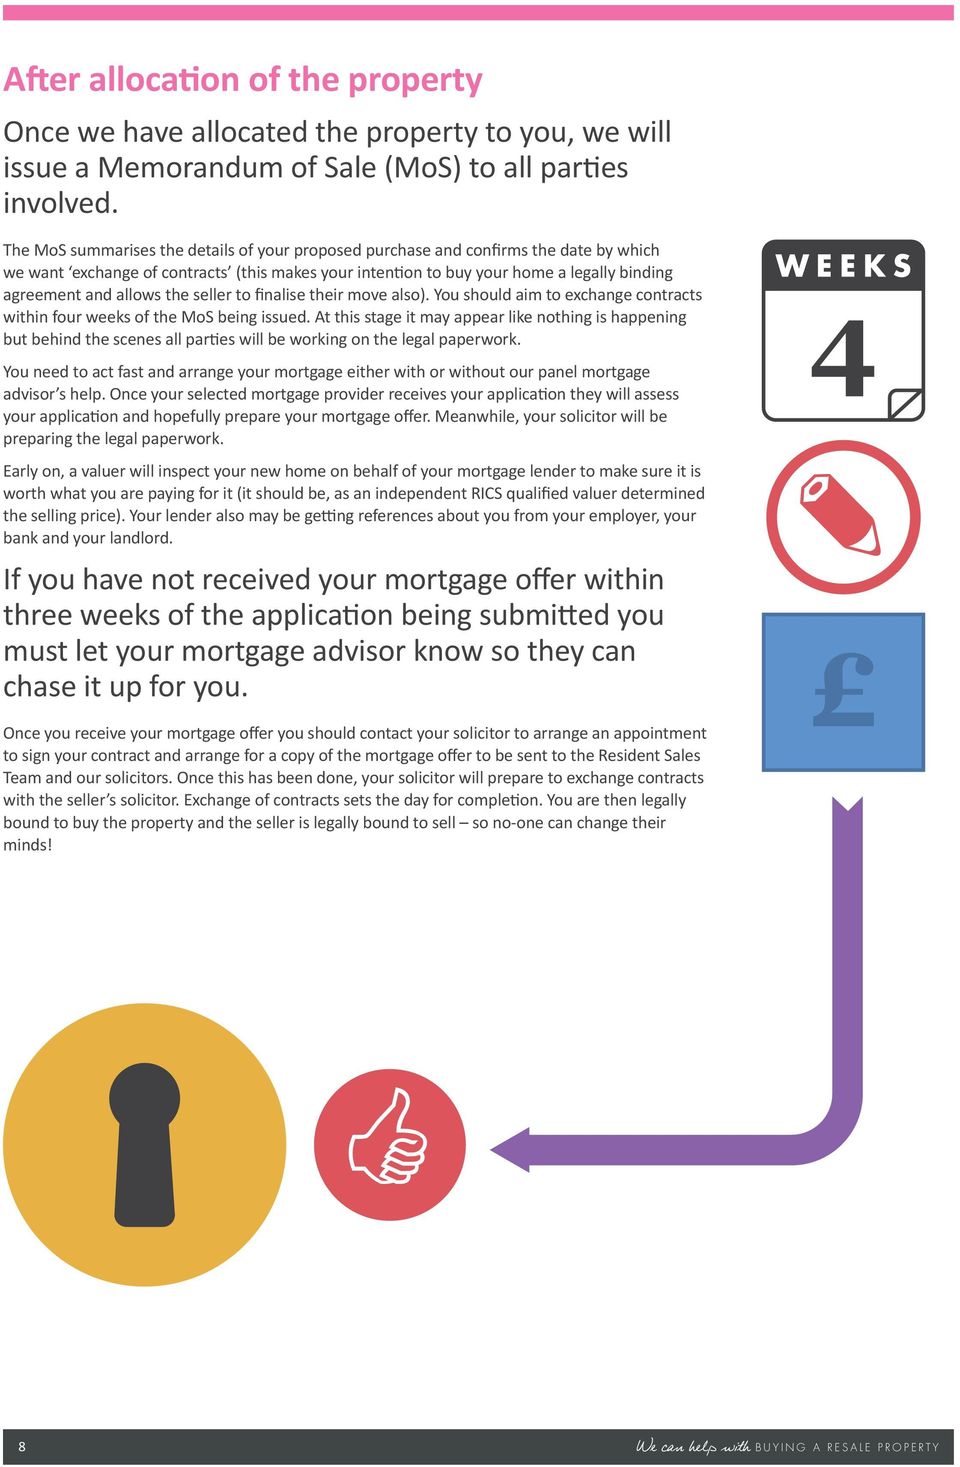 allows the seller to finalise their move also). You should aim to exchange contracts within four weeks of the MoS being issued.